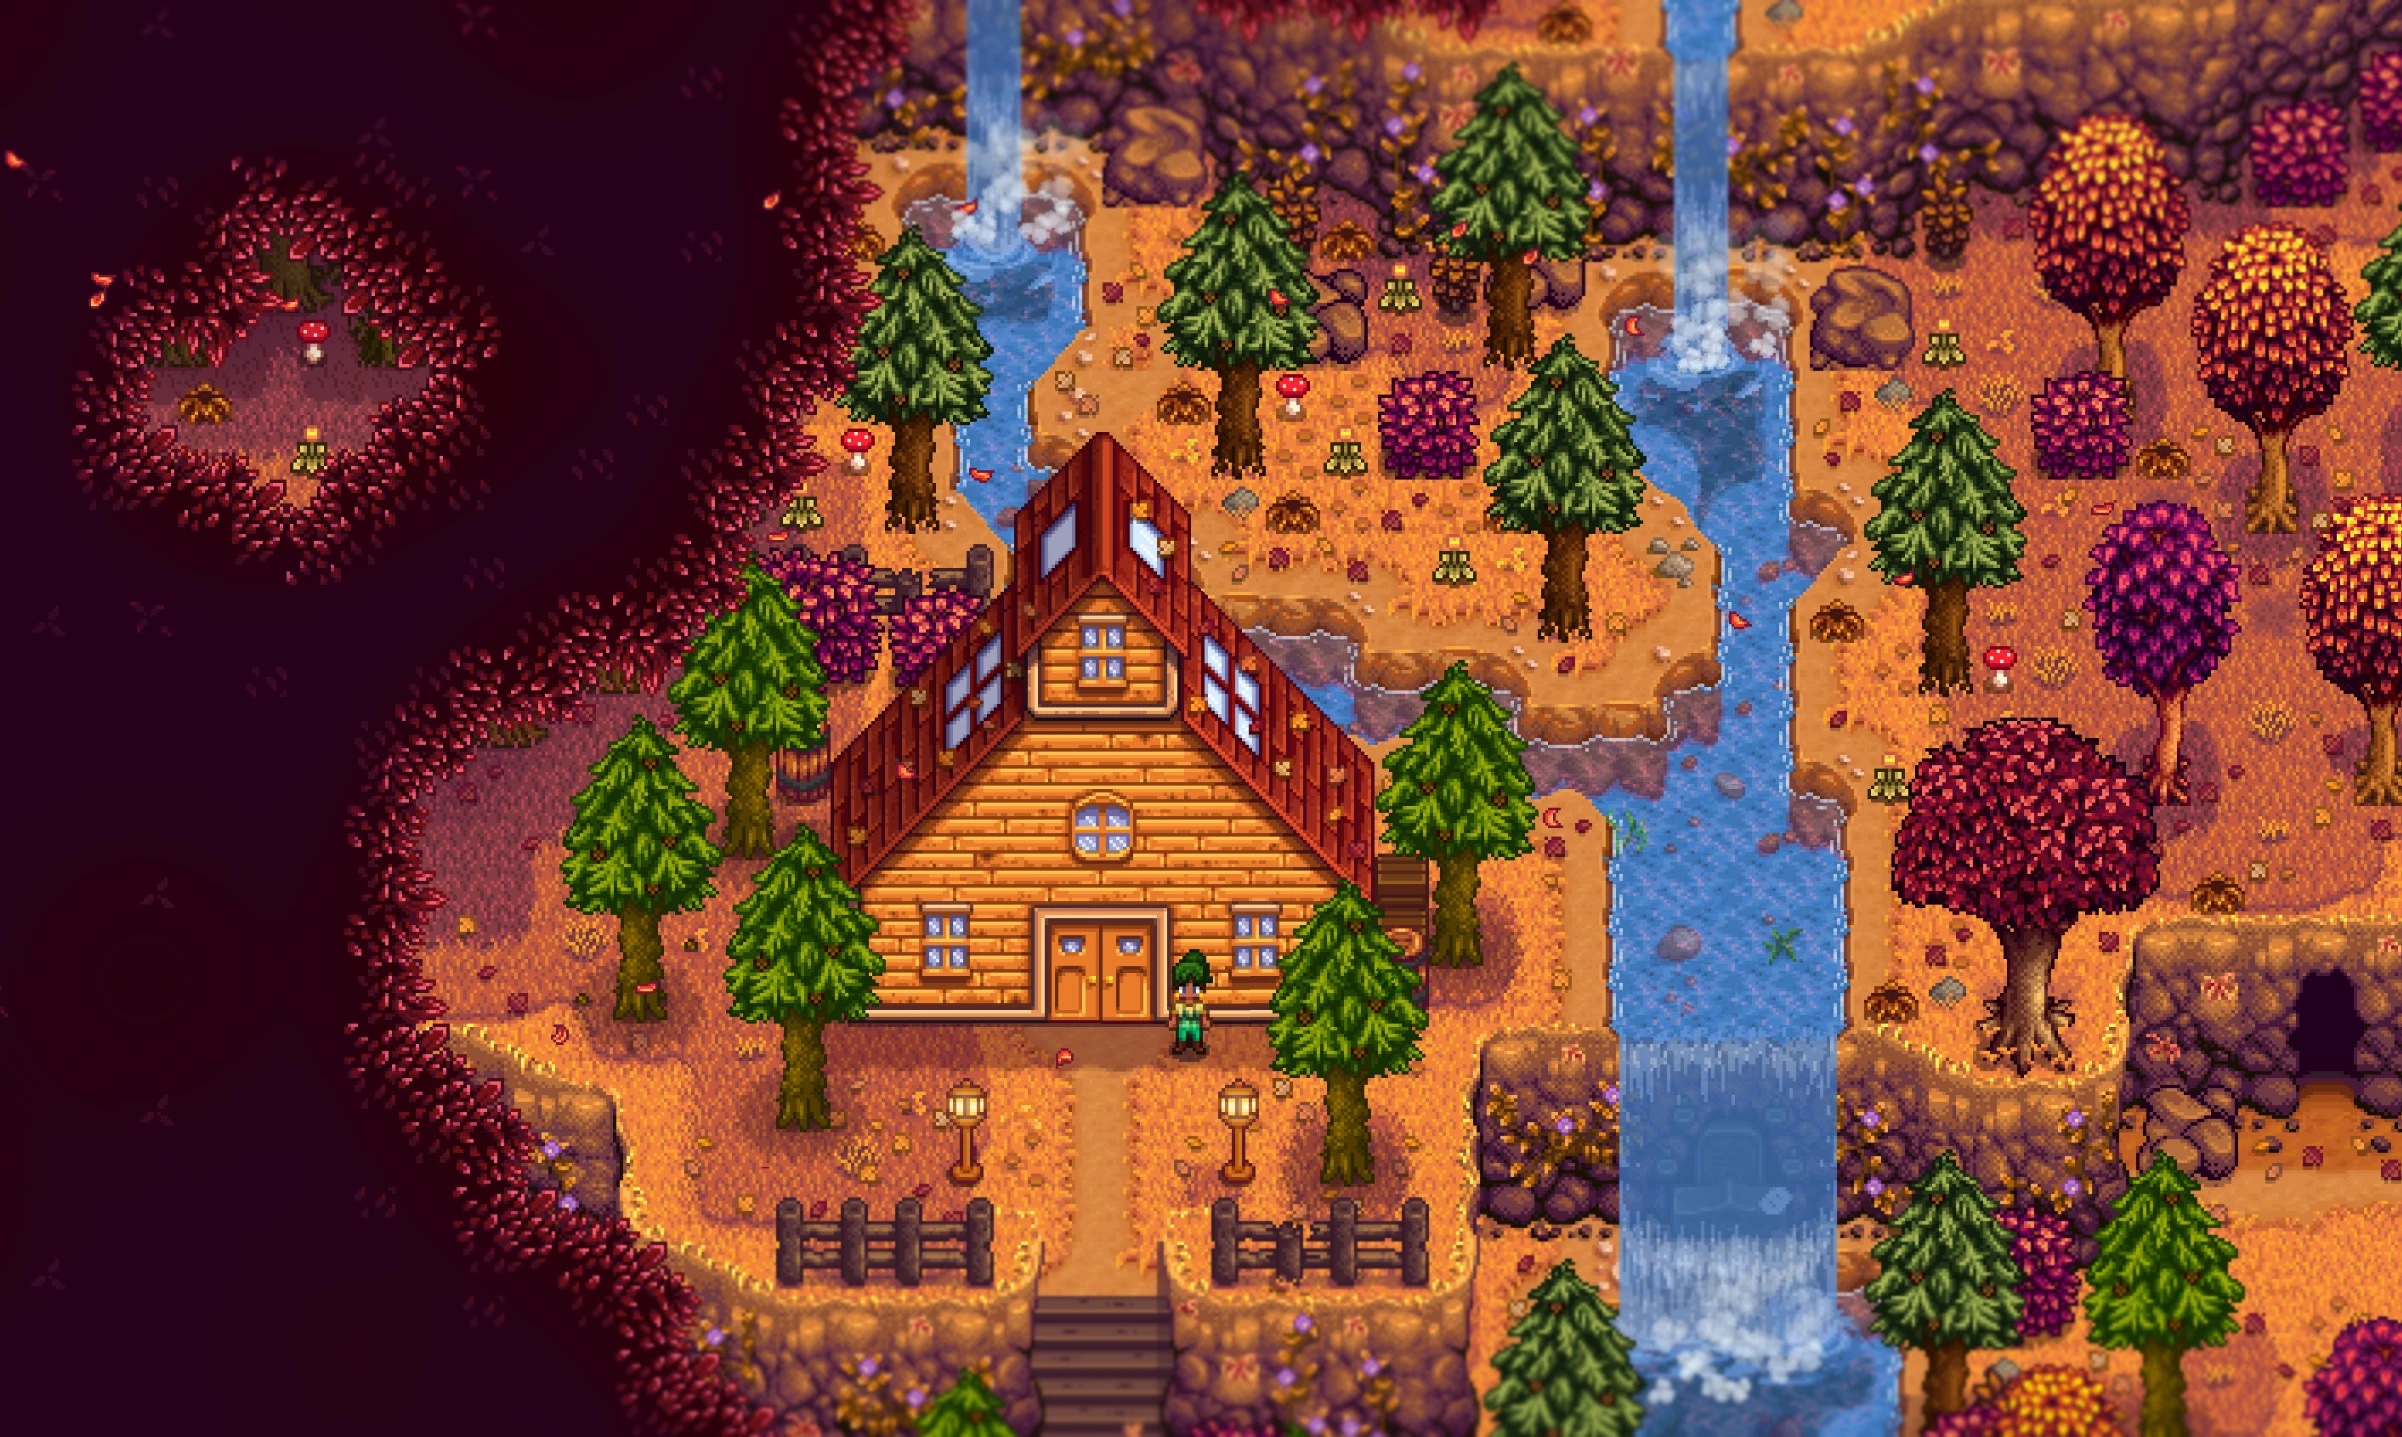 A screenshot from the Stardew Valley Expanded mod, showing a farmer in front of a home with a river and waterfall to the right.